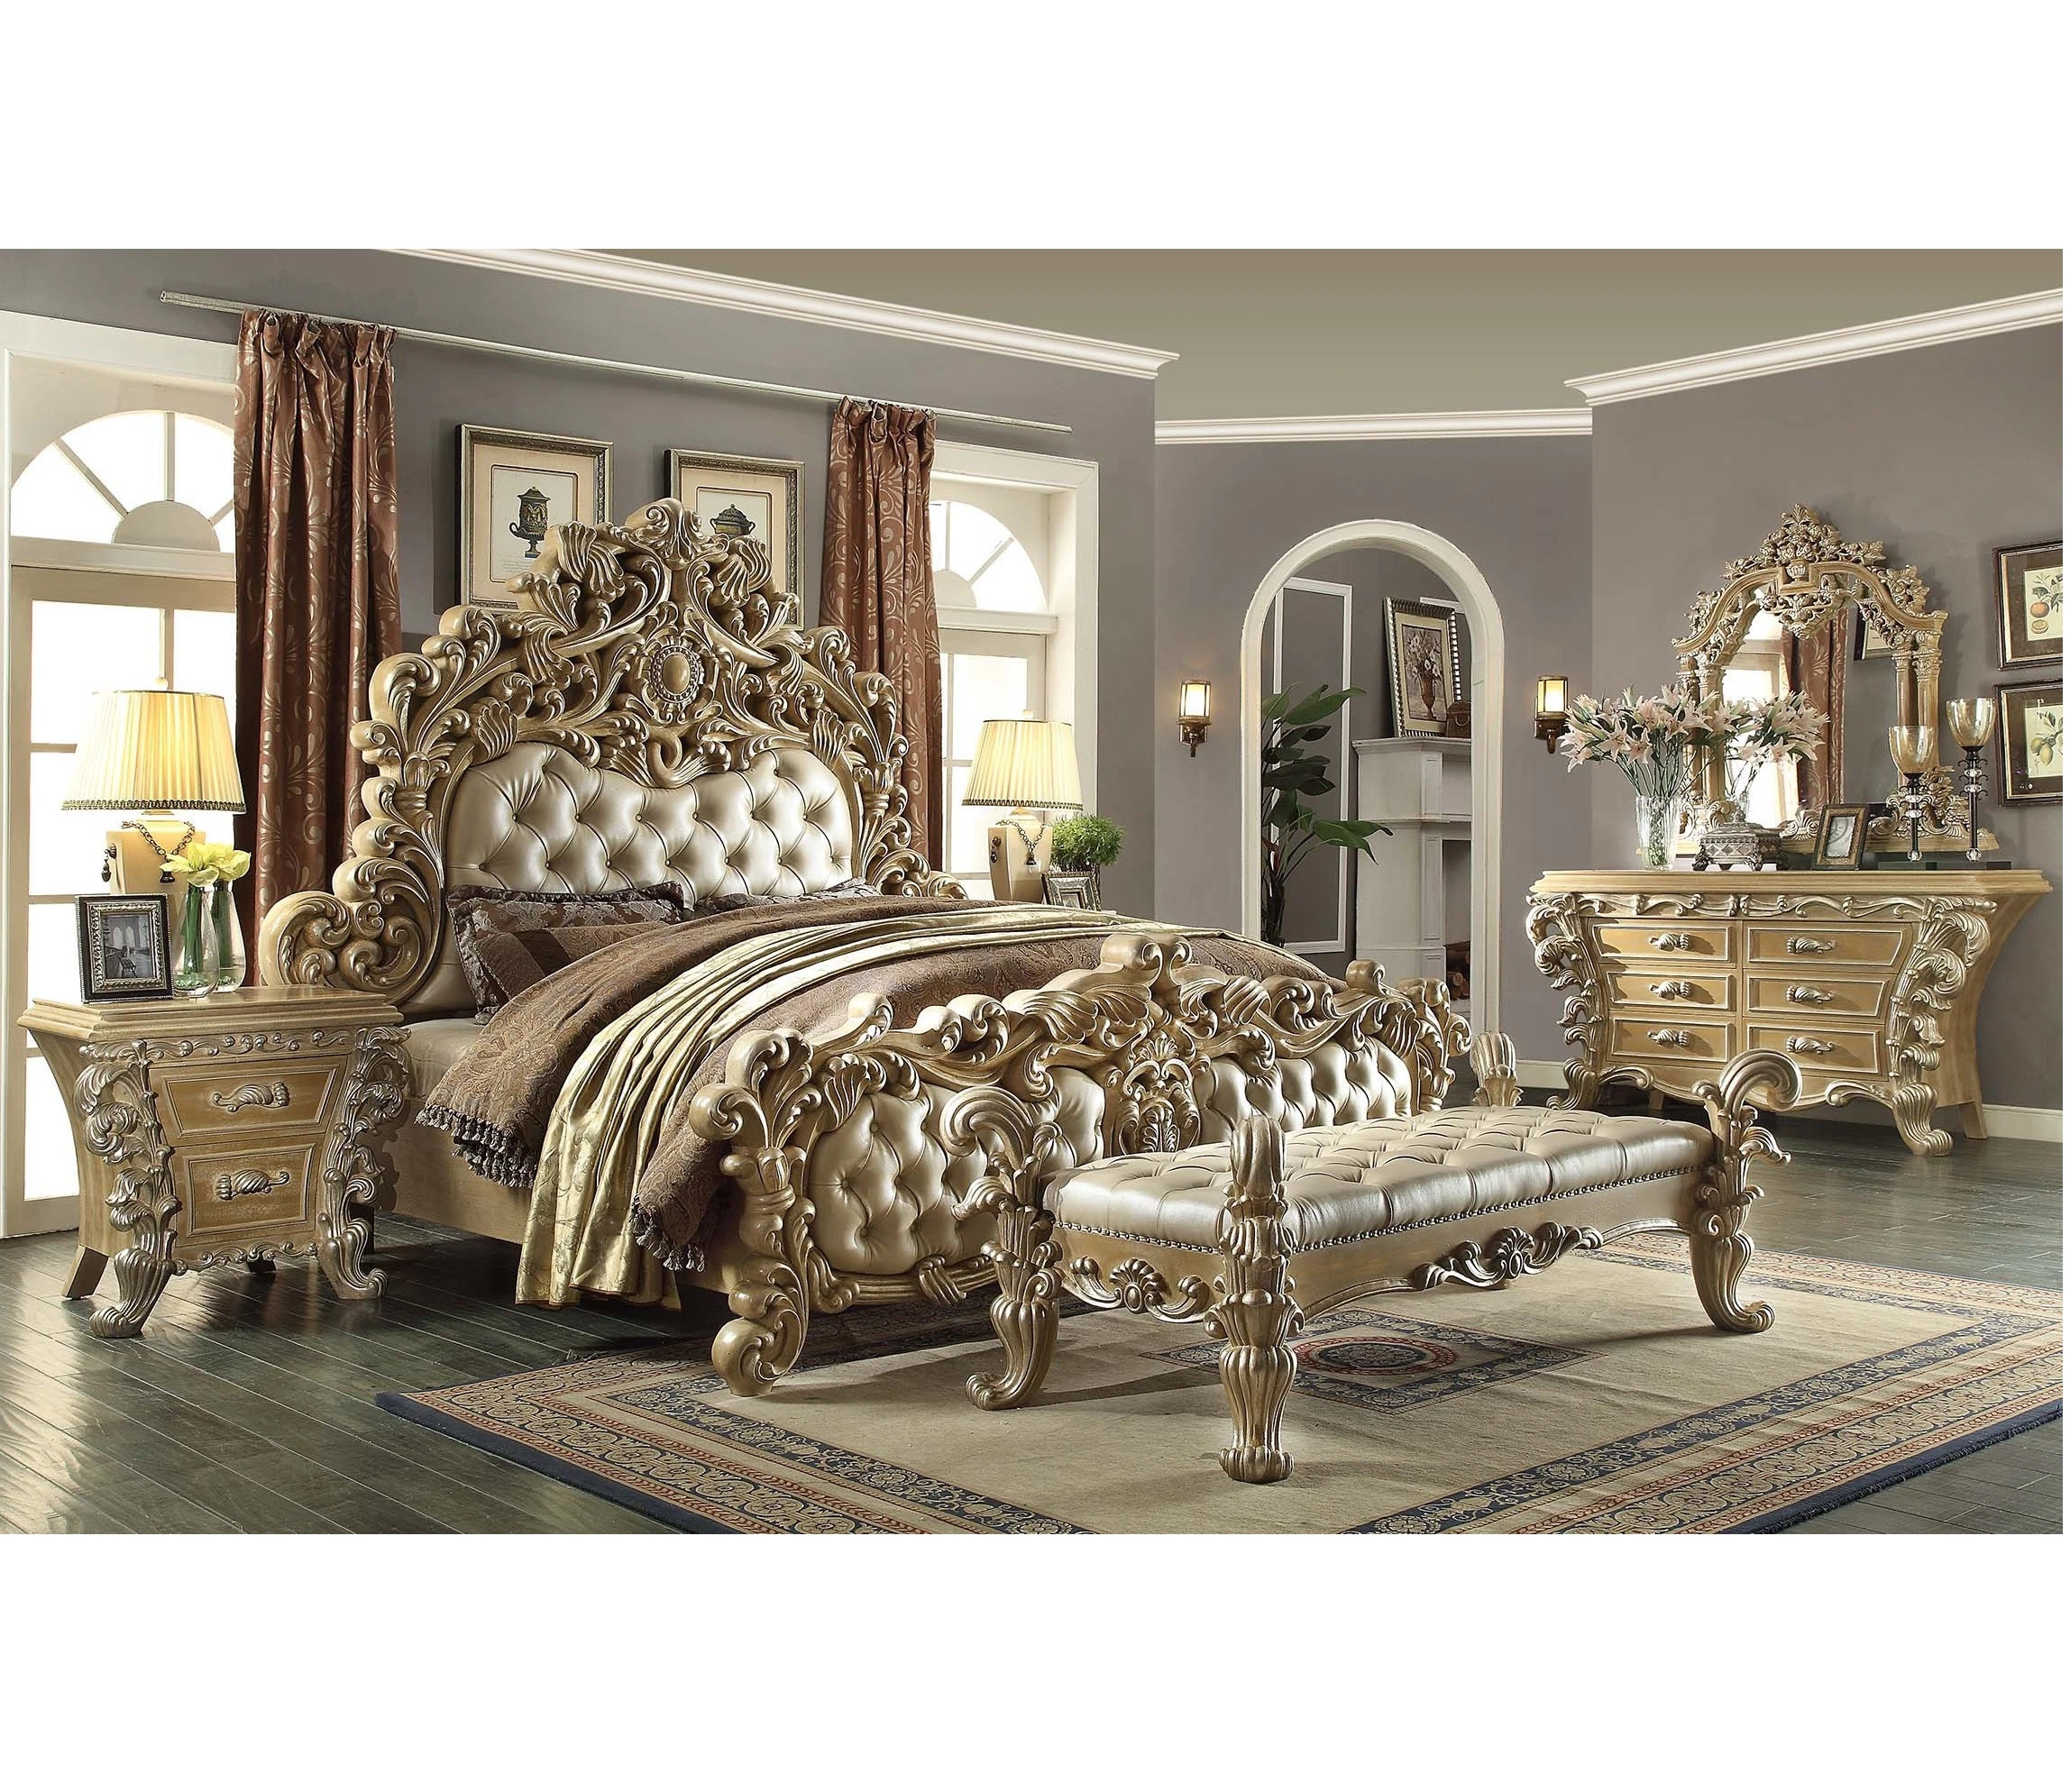 luxury bedroom furniture sets victorian style furniture for bedroom